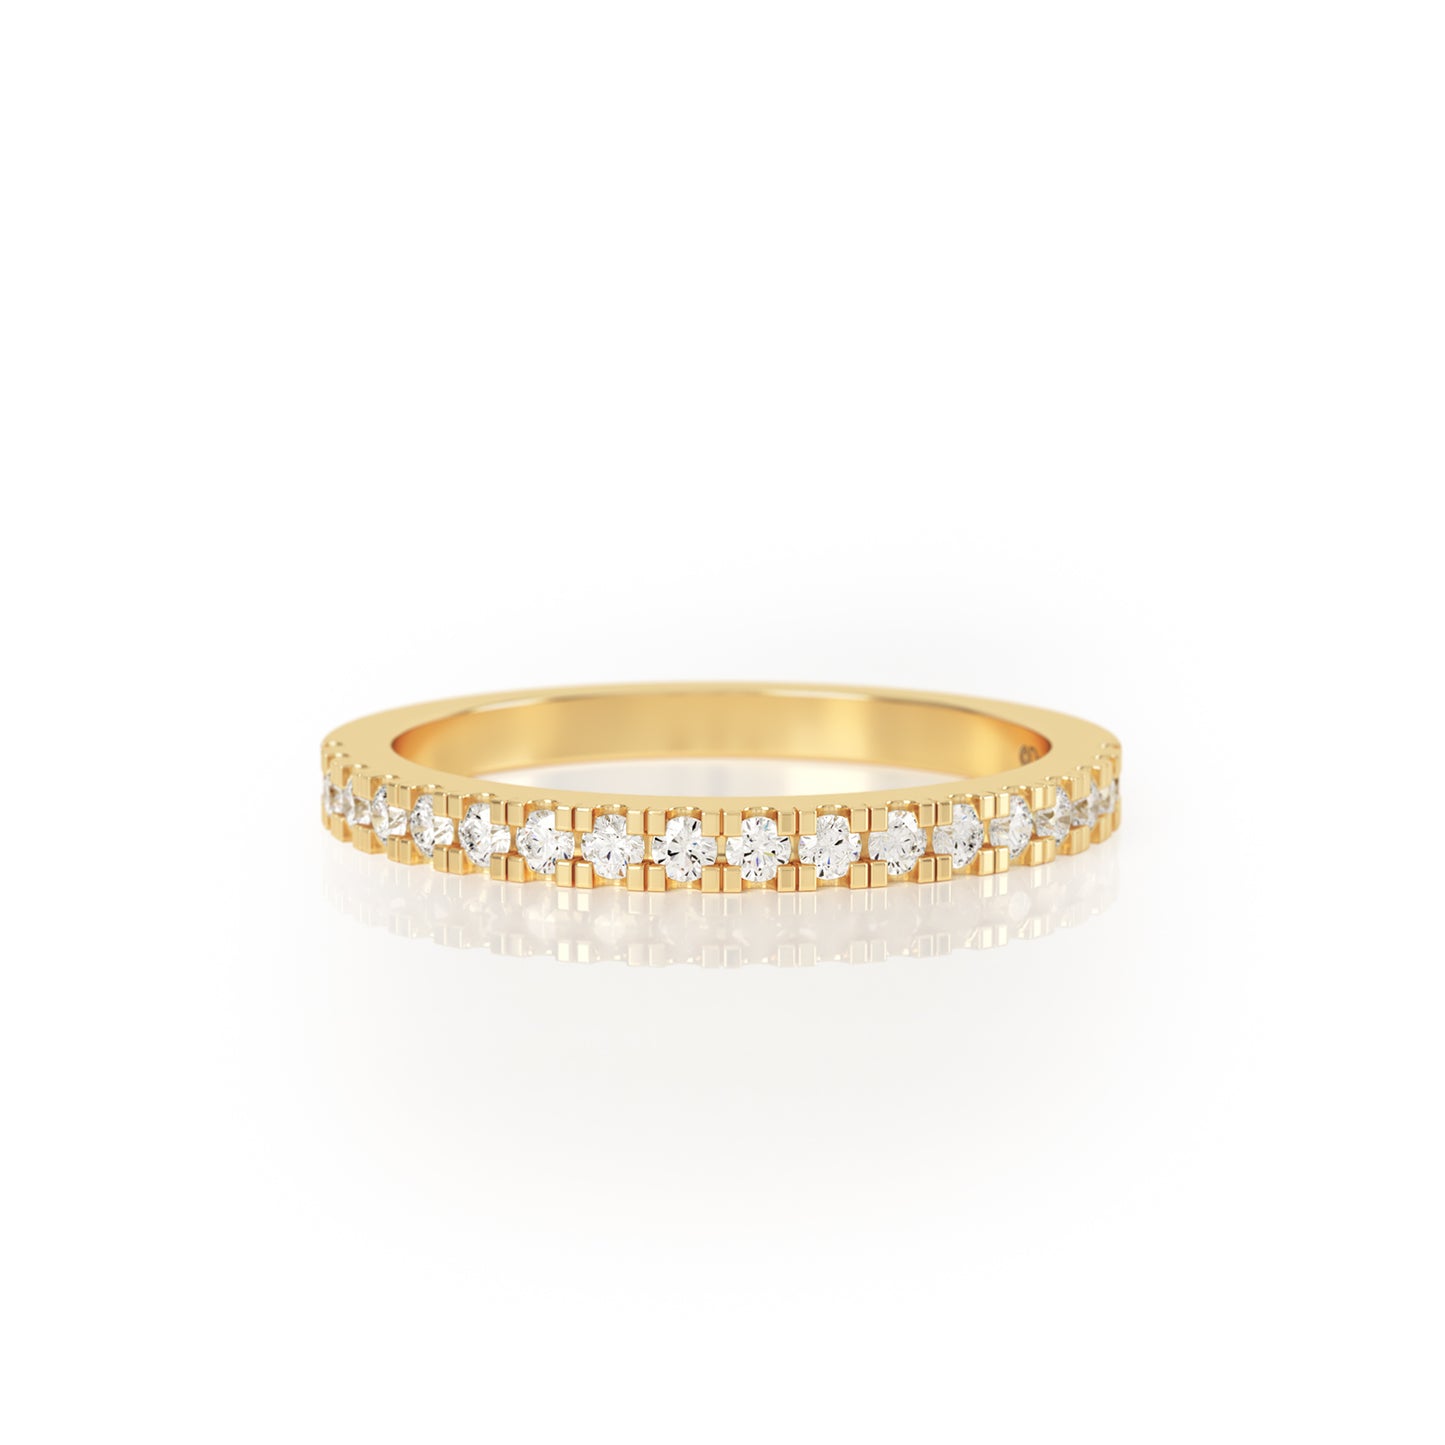 SYNERGI Ethical Diamond Eternity Ring in 18k Yellow Gold